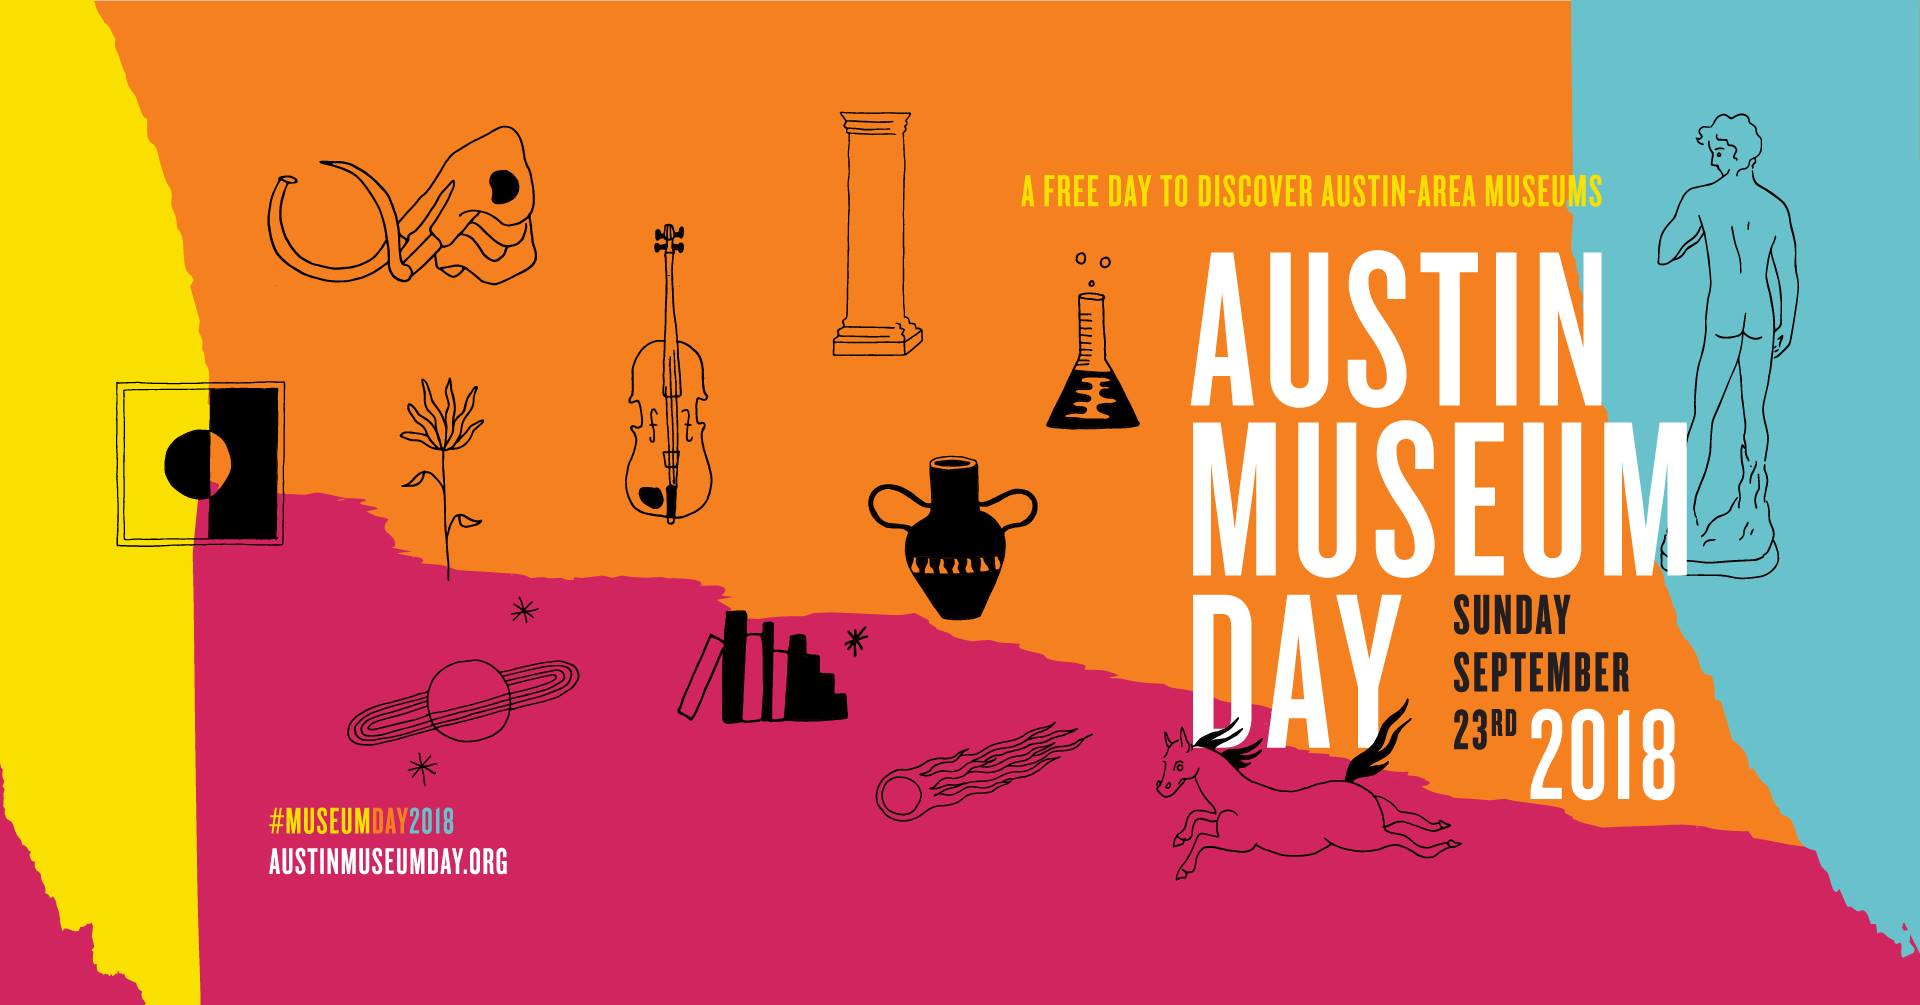 Advertisement for Austin Museum Day 2018